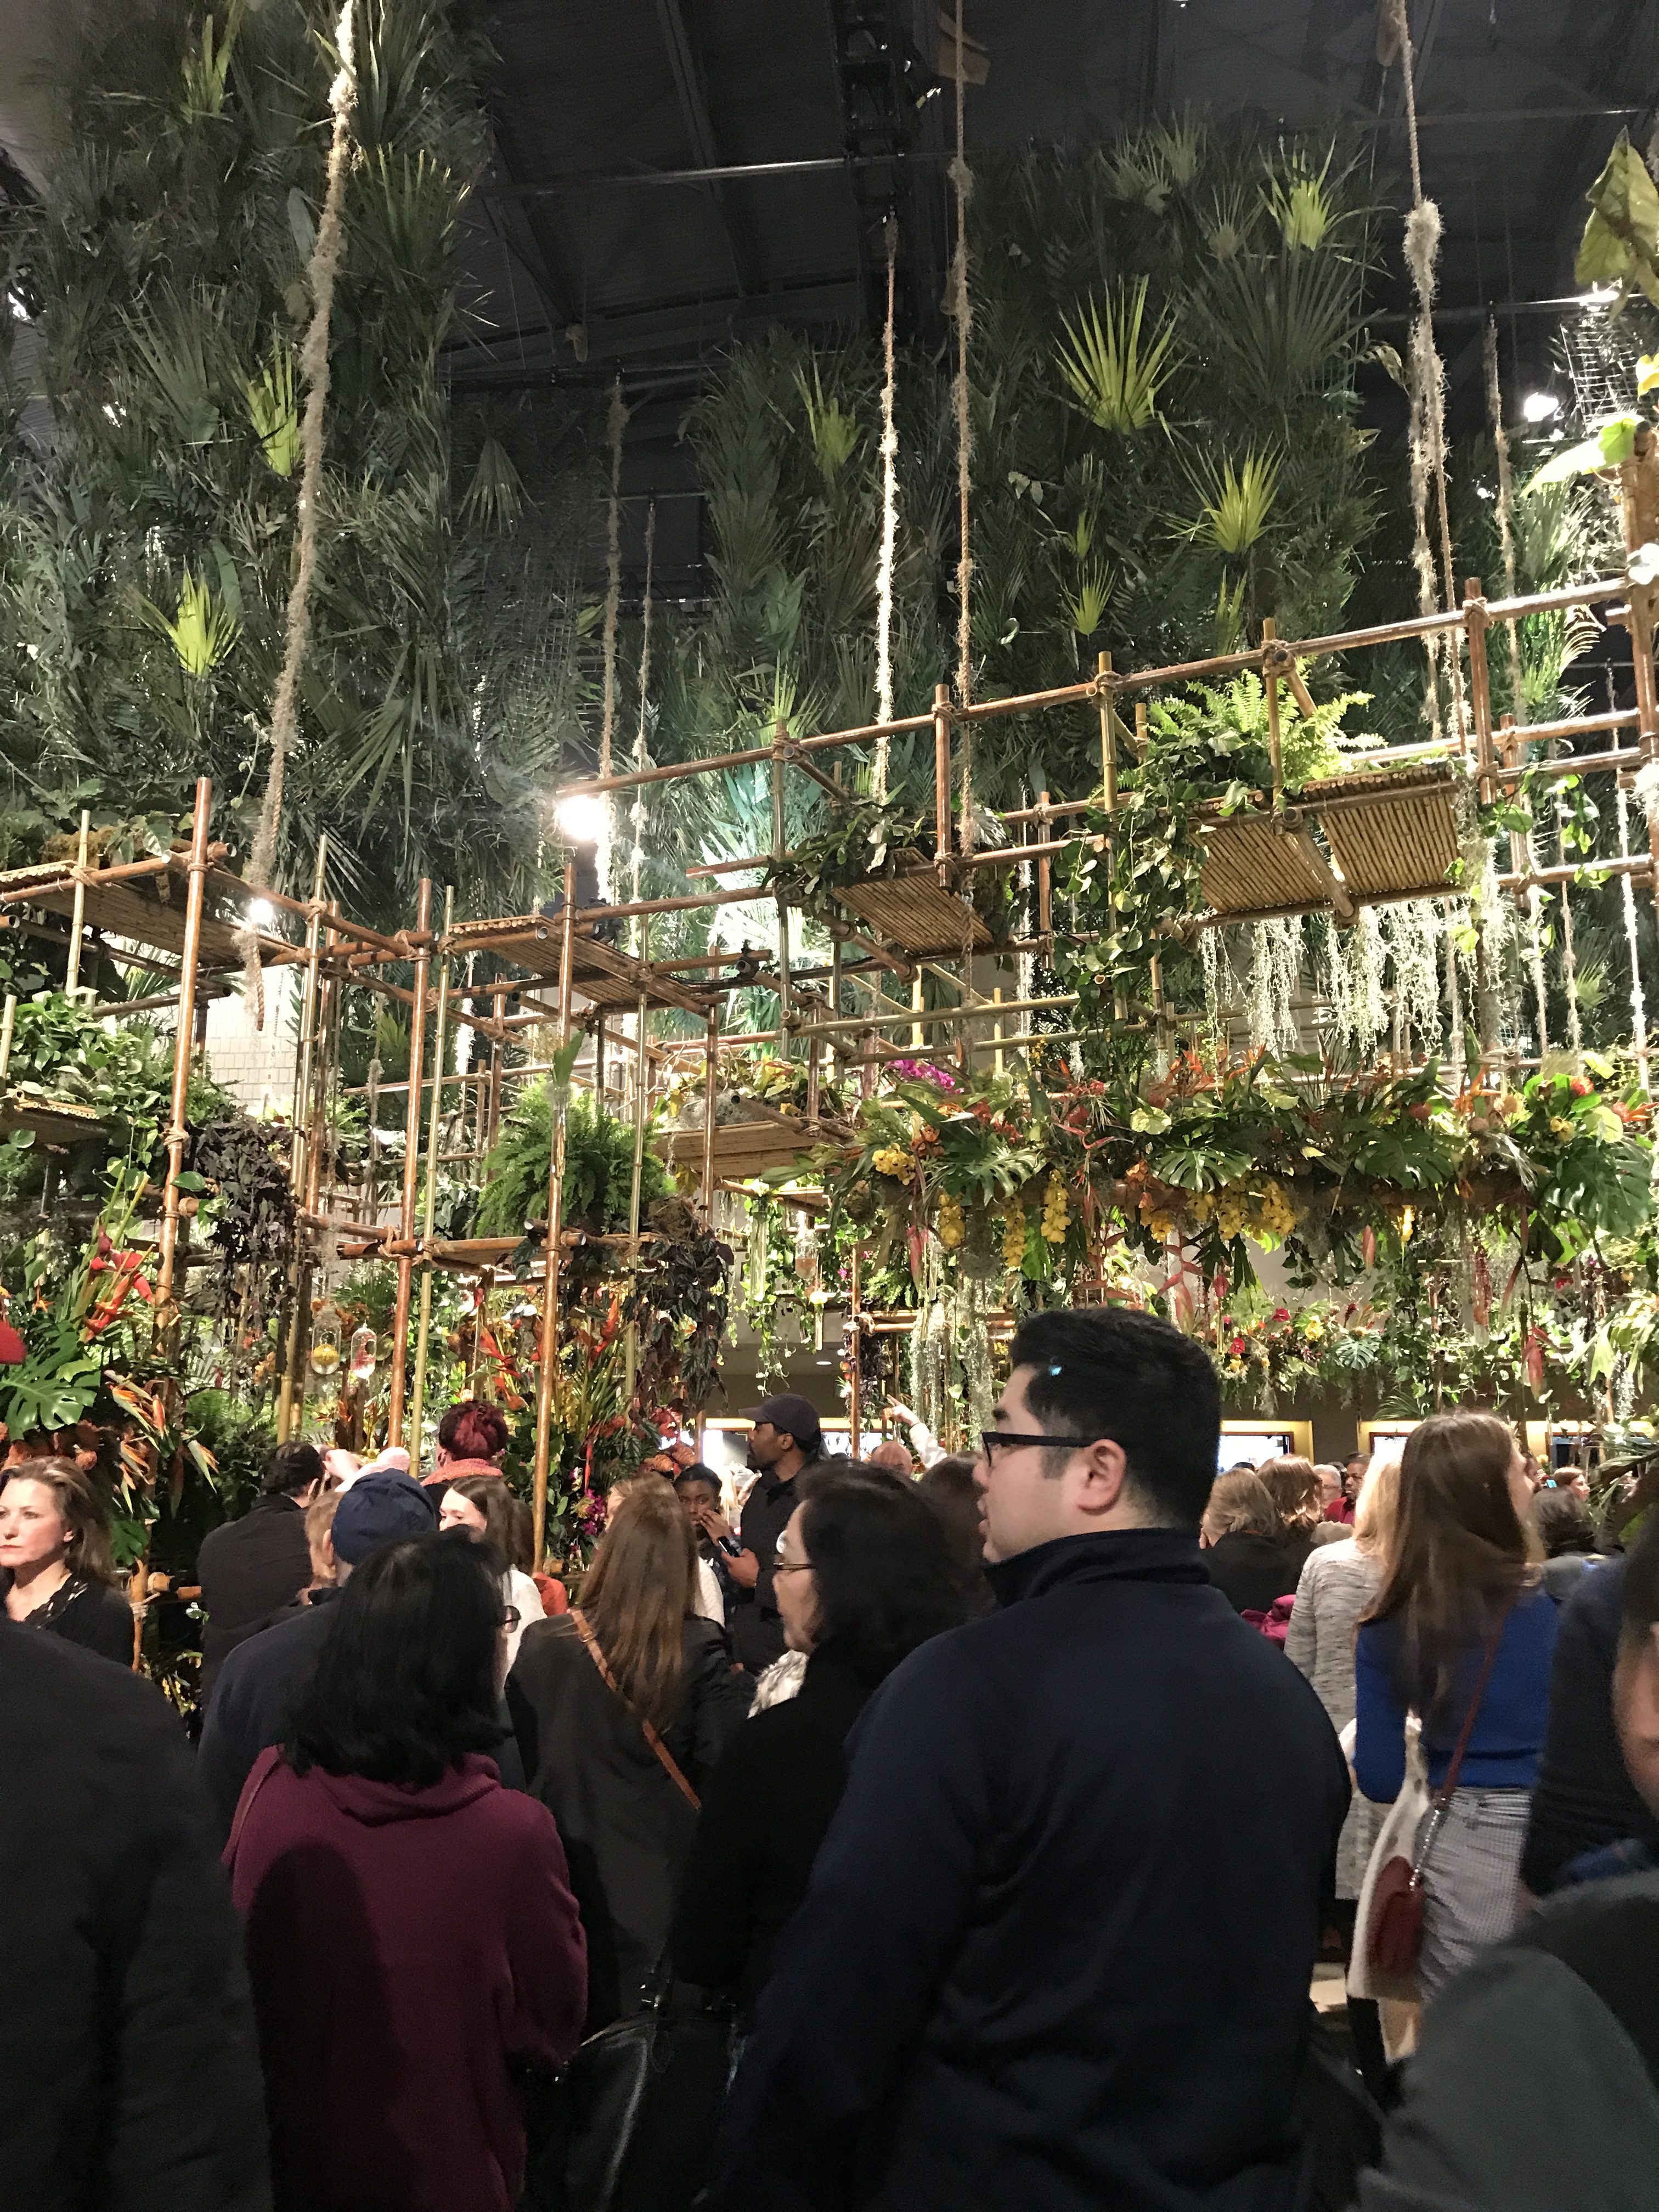 2018 Philly Flower Show, "Wonders of Water" Rainforest with 25' waterfall